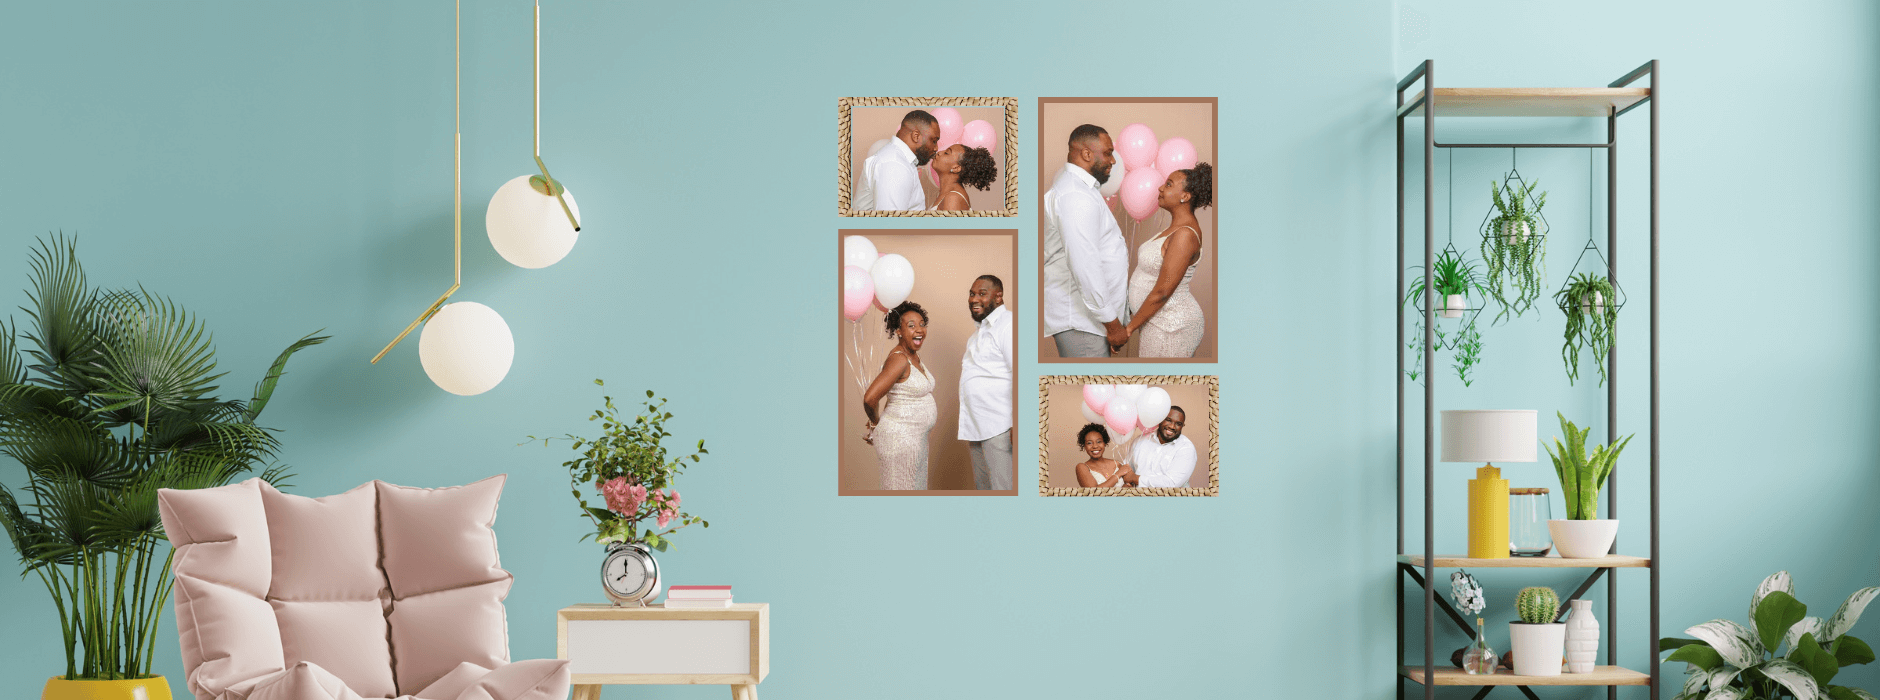 Symmetrical gallery wall style using family photography.